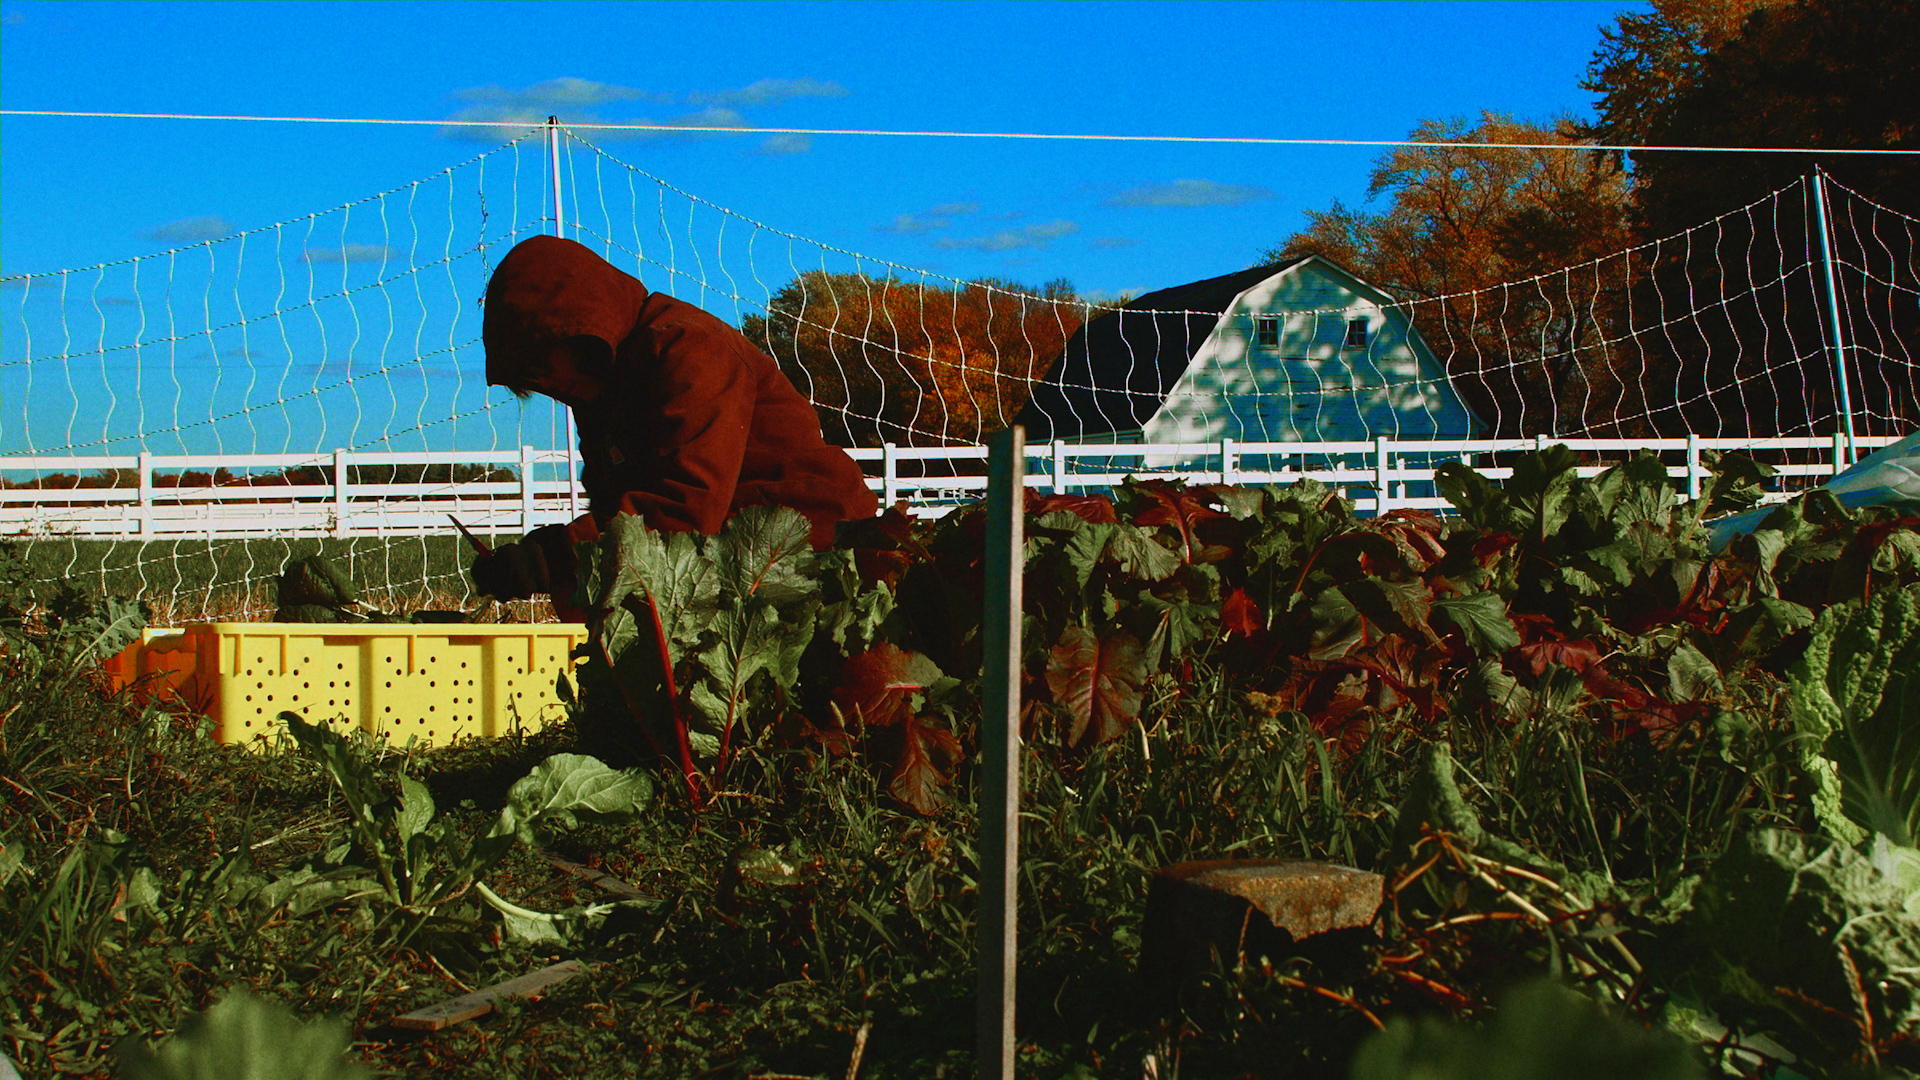 A person wearing a maroon zip-up hoodie with the hood up kneels in a bed of leafy greens and places some in a bright yellow container.